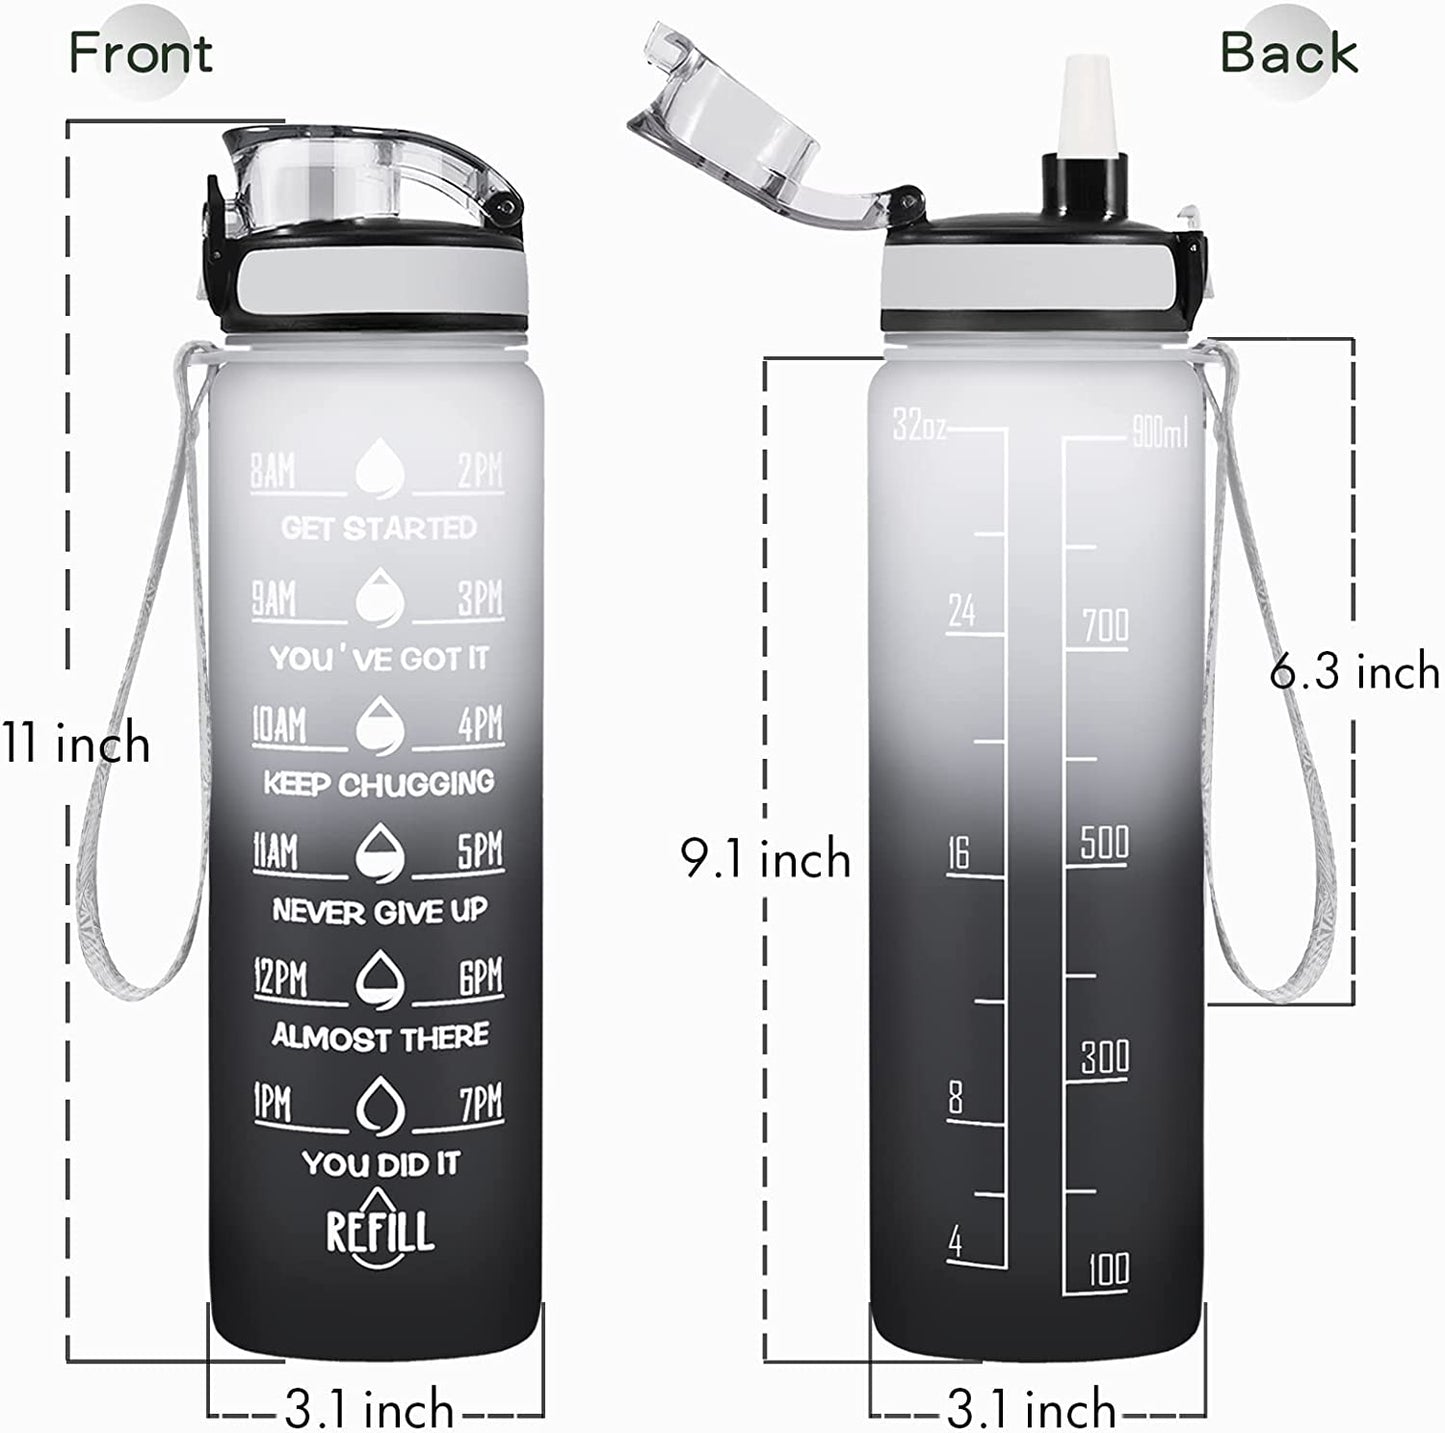 32 Oz Water Bottle, Leakproof BPA & Toxic Free, Motivational Water Bottle with Times to Drink and Straw, Fitness Sports Water Bottle with Strap for Office, Gym, Outdoor Sports, Gray-Black